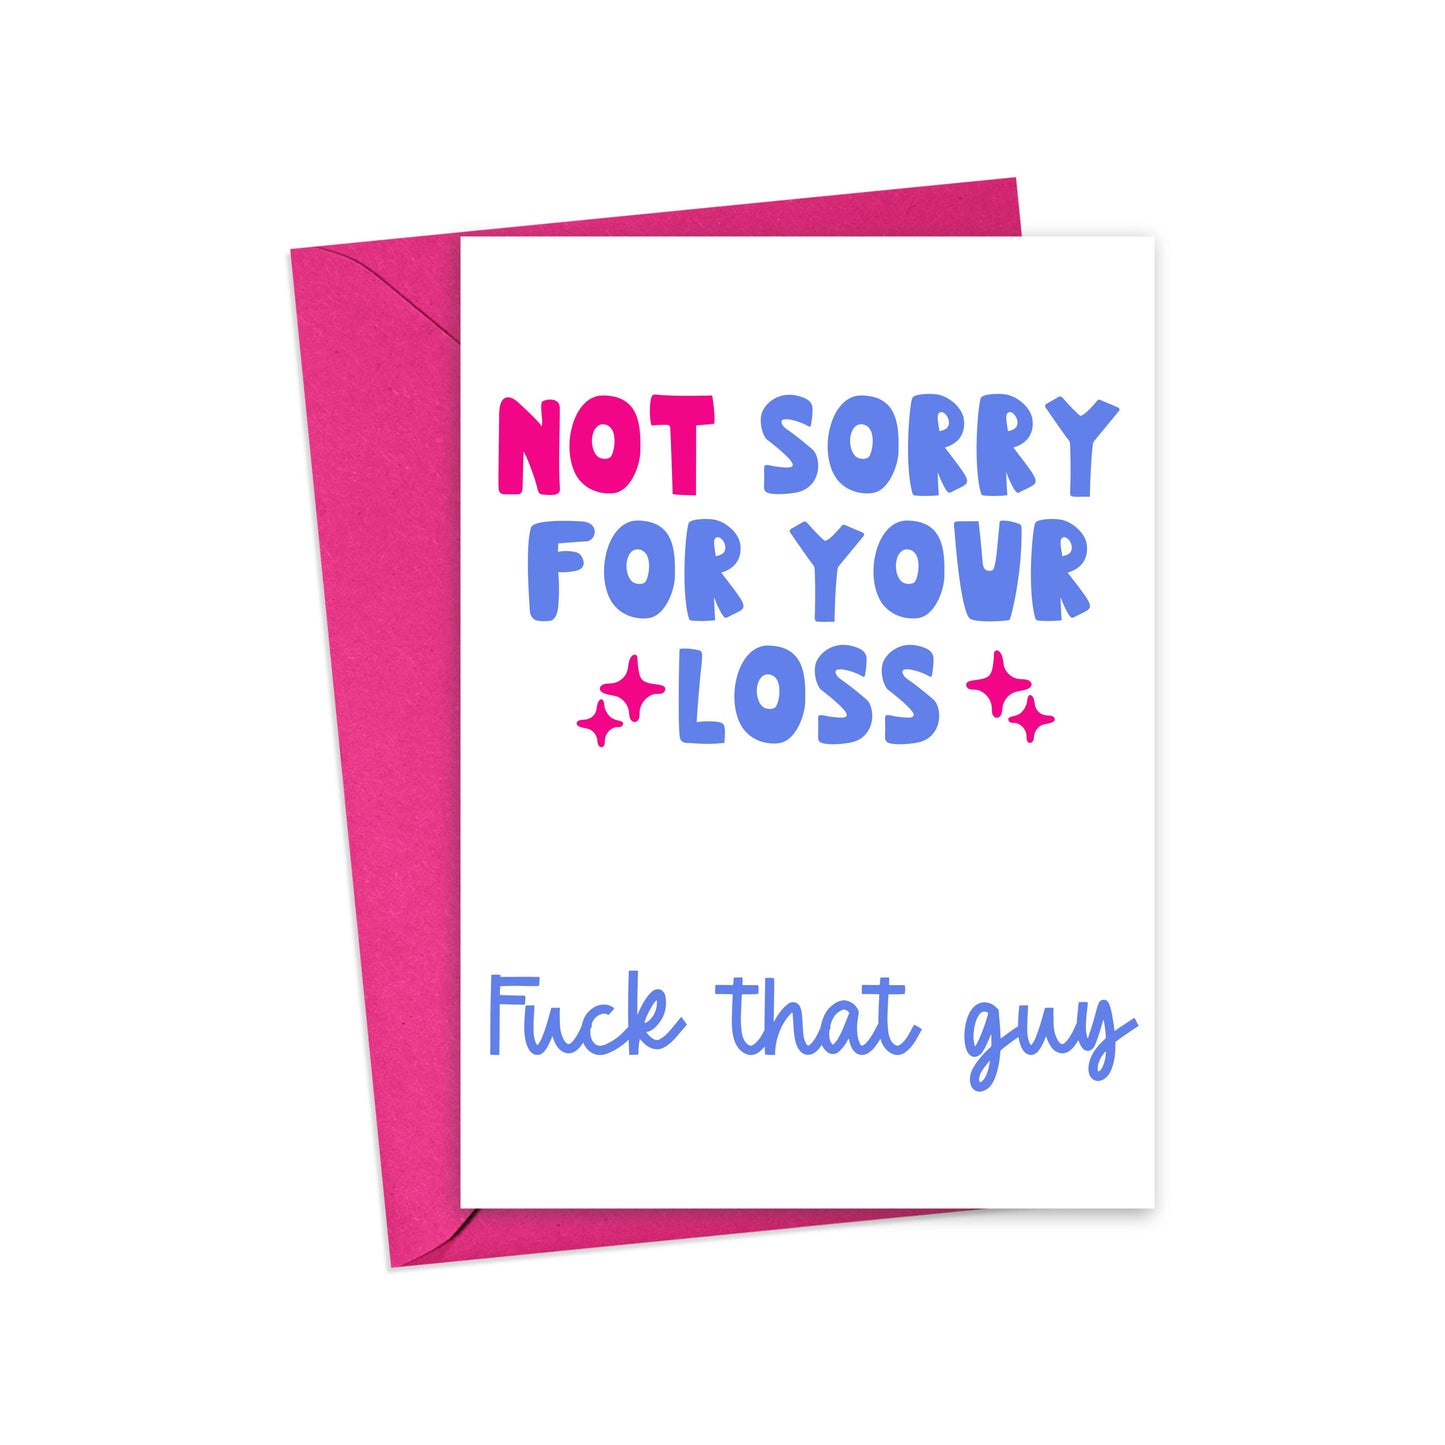 R is for Robo - Not Sorry Funny Breakup Card - Sassy Divorce Card for Friend